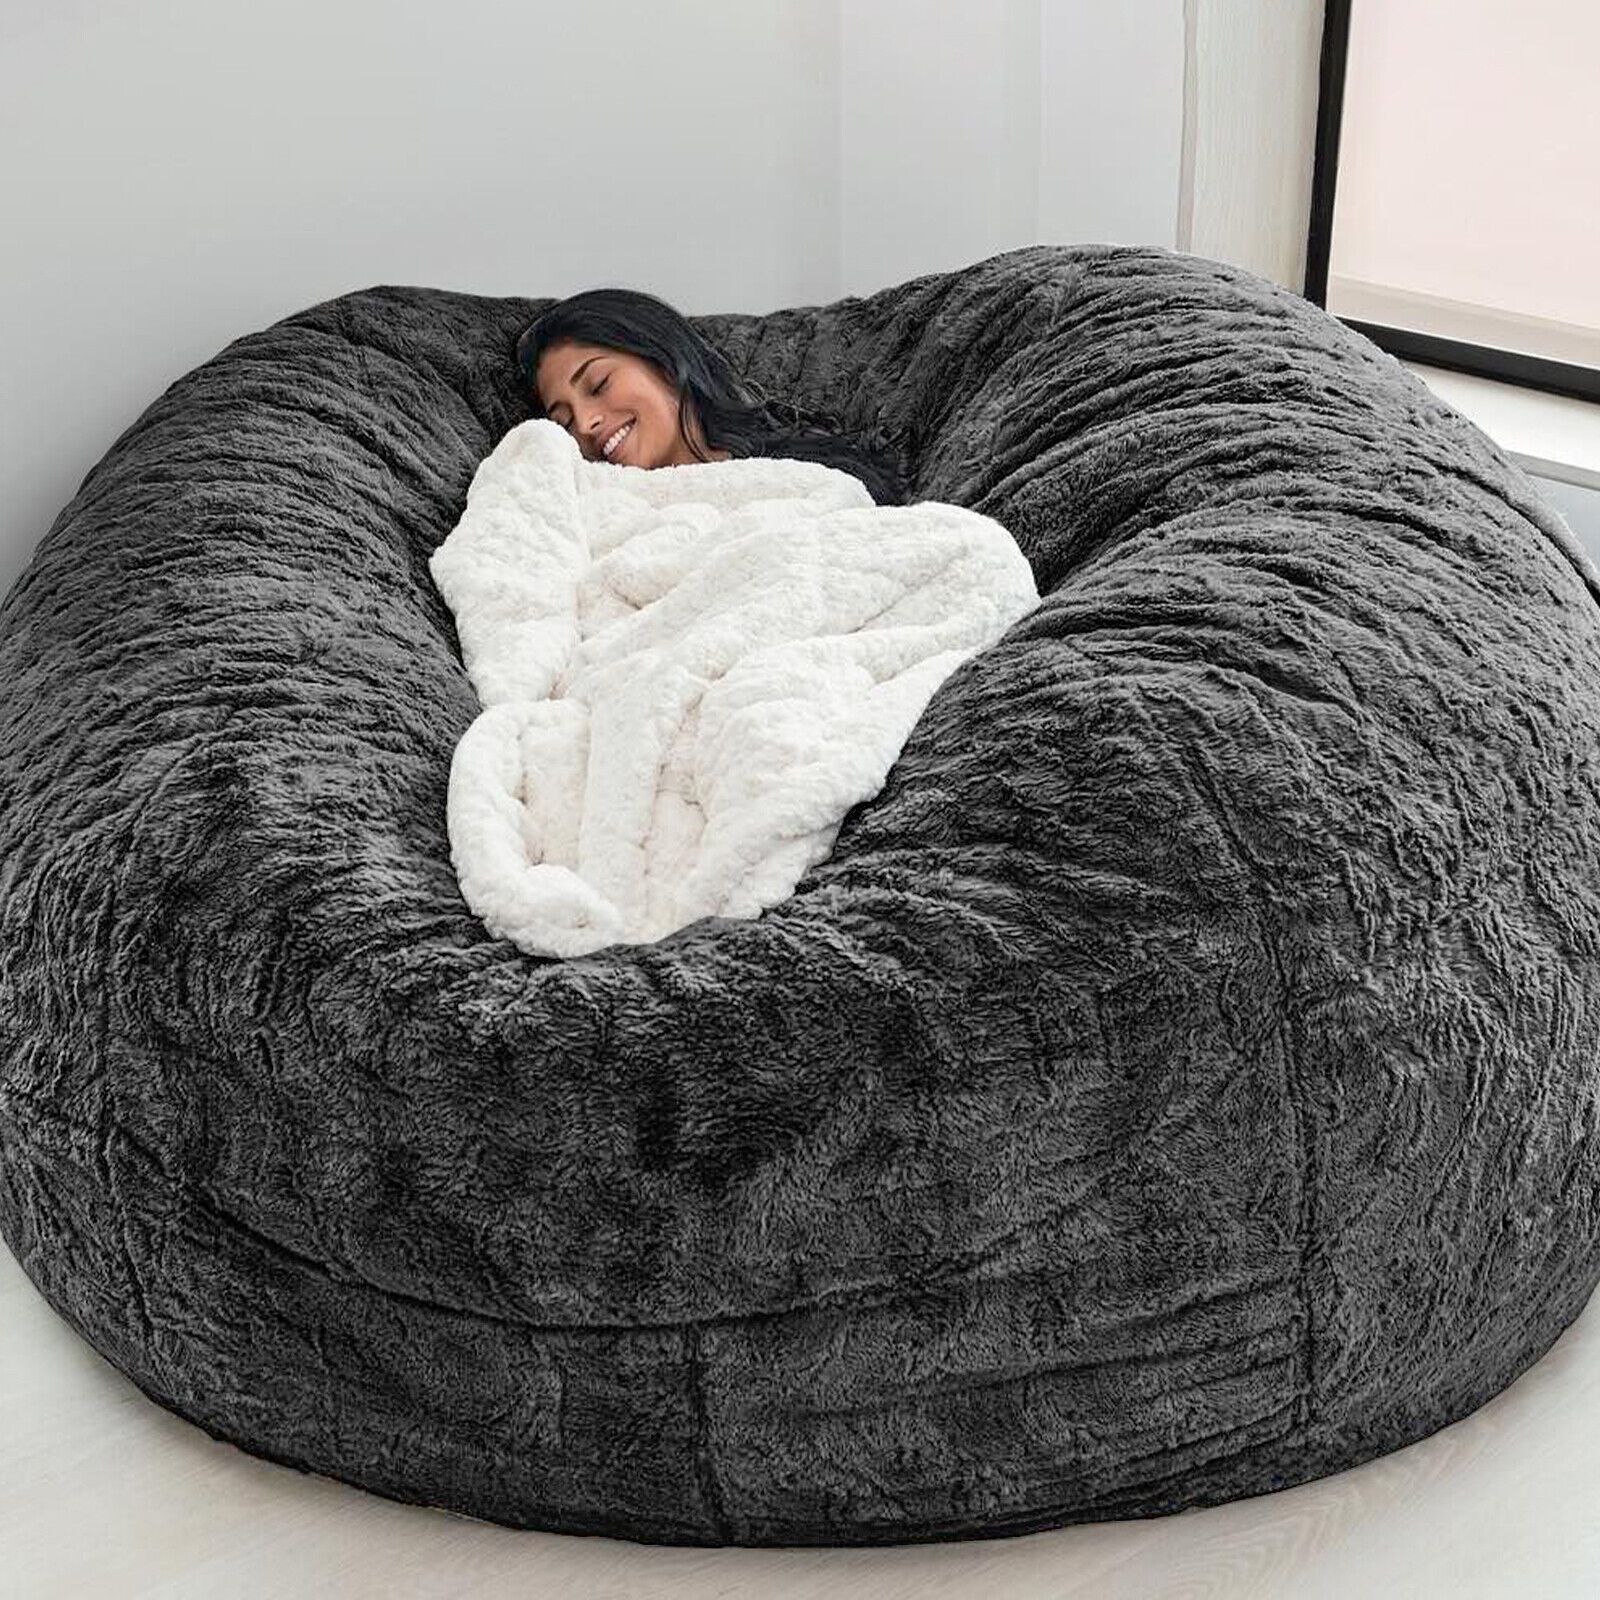 Advantages of Big Bean Bag Chairs You Do  Not Know